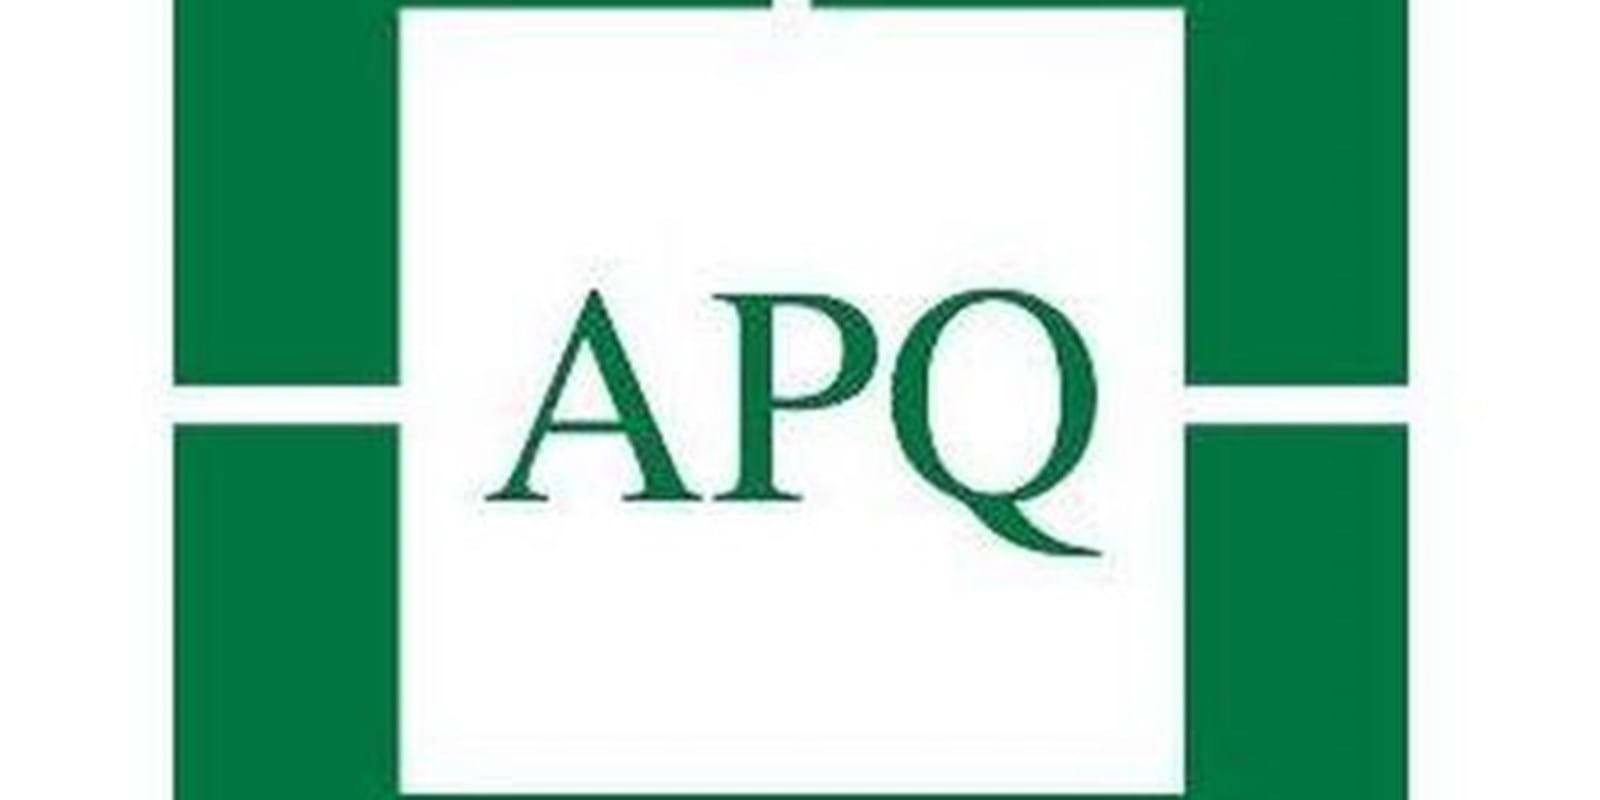 The repossession of a dwelling by a landlord is also an important process for tenants seeking to become landlords themselves, says the APQ